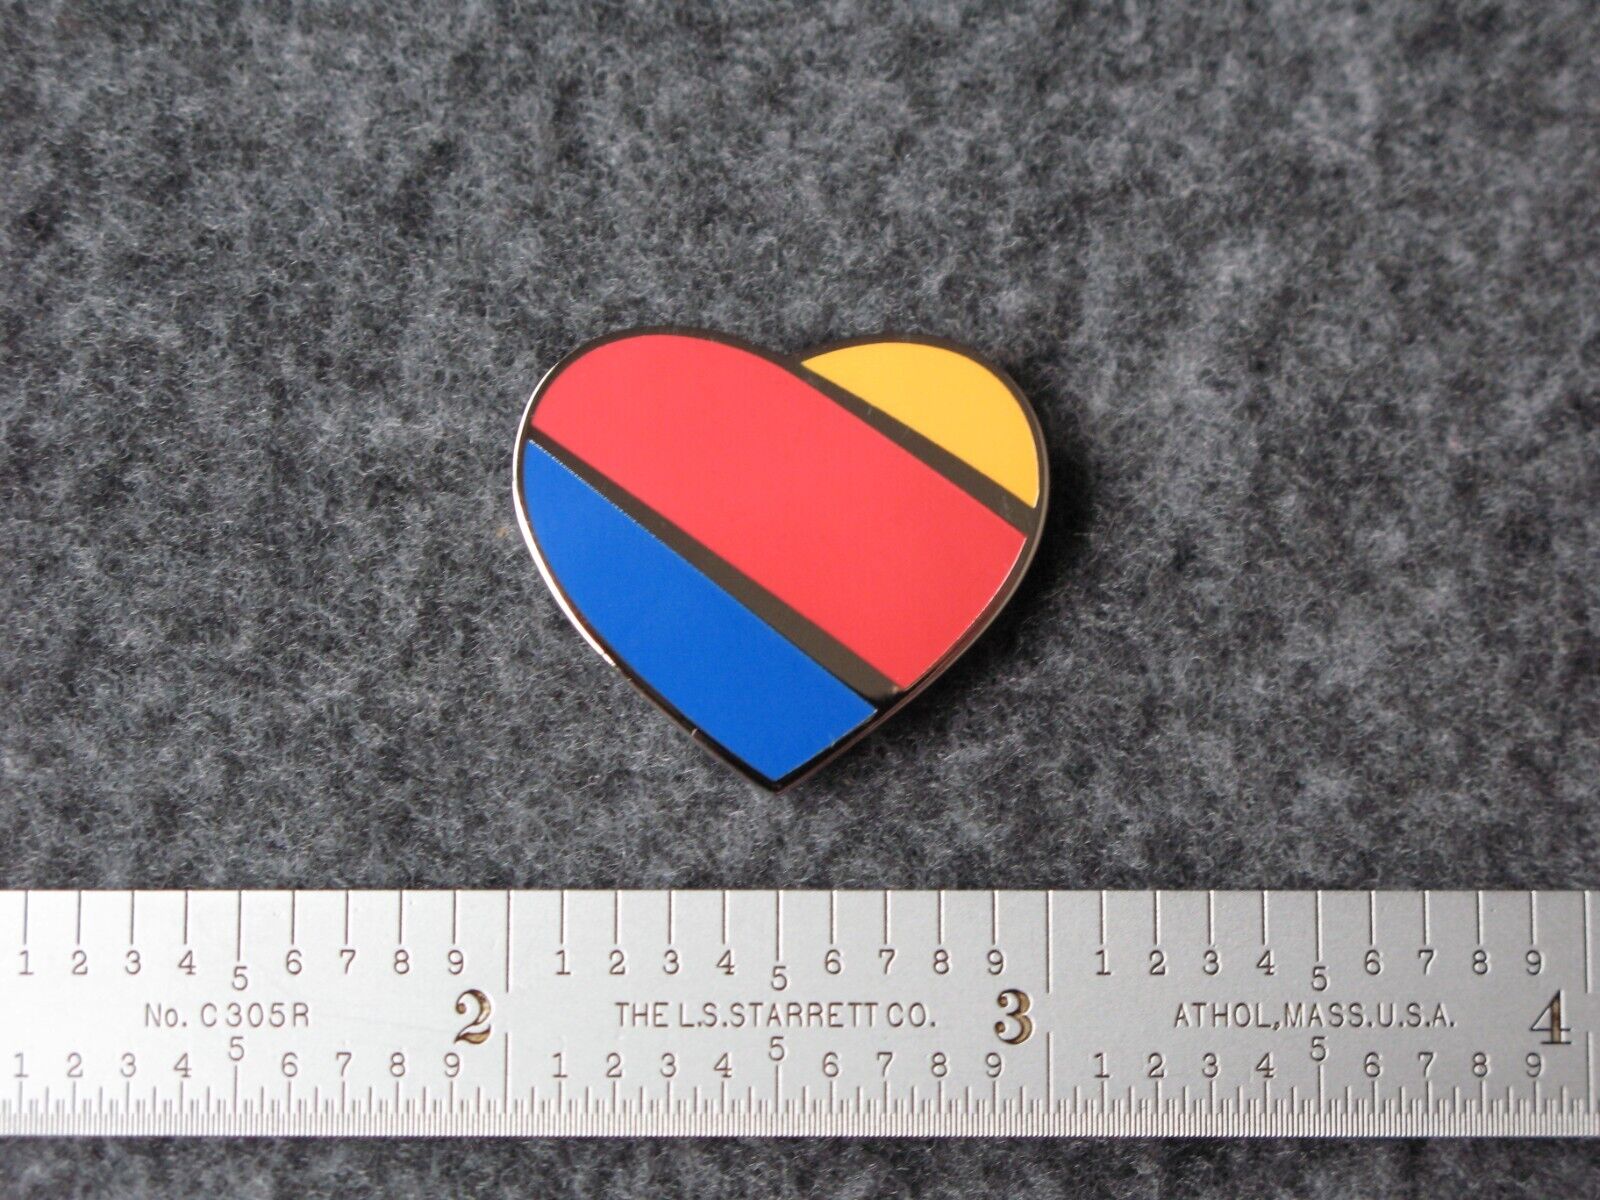 SOUTHWEST AIRLINES TRI COLOR HEART LOGO PIN.